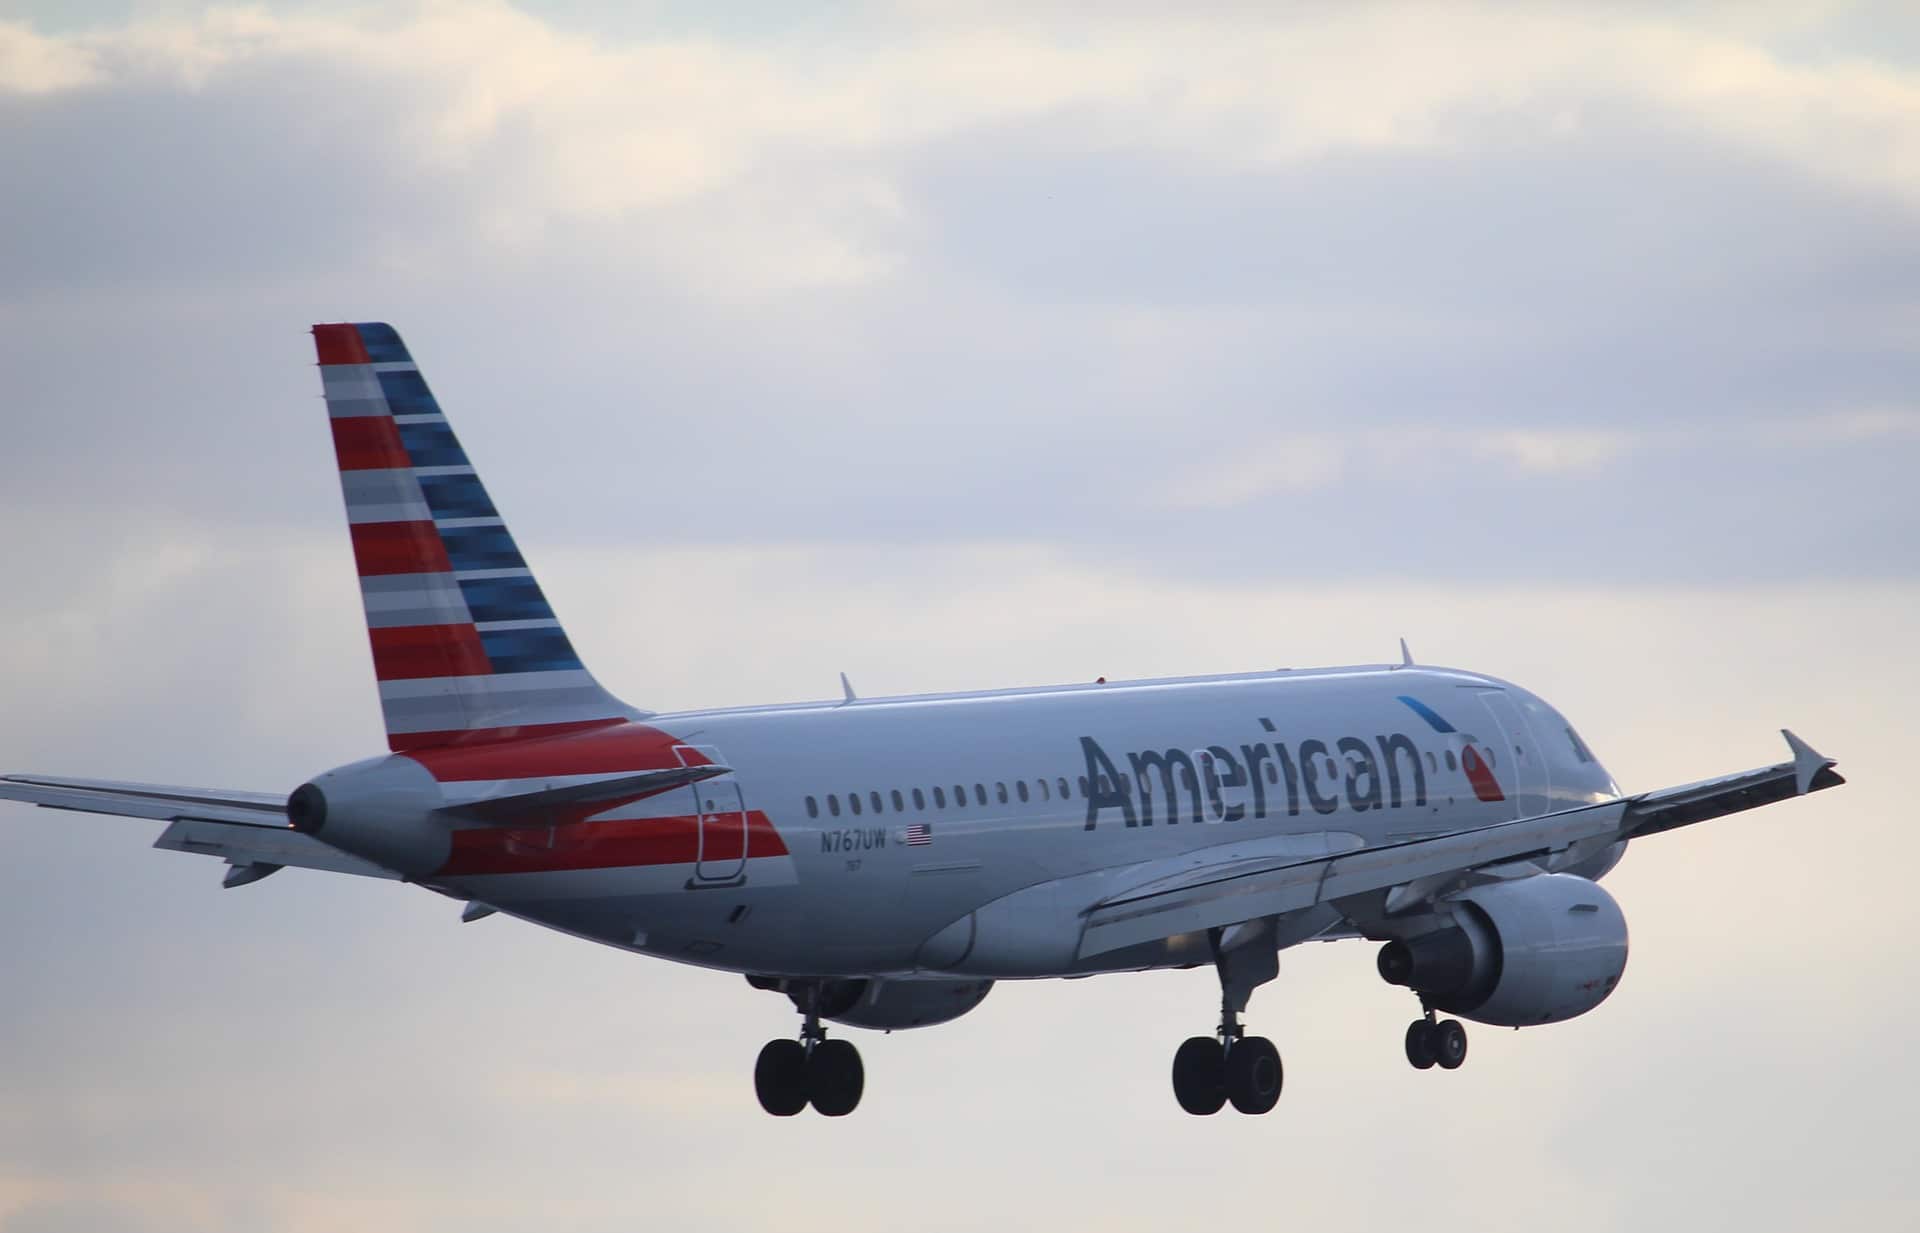 American Airlines Military Discounts